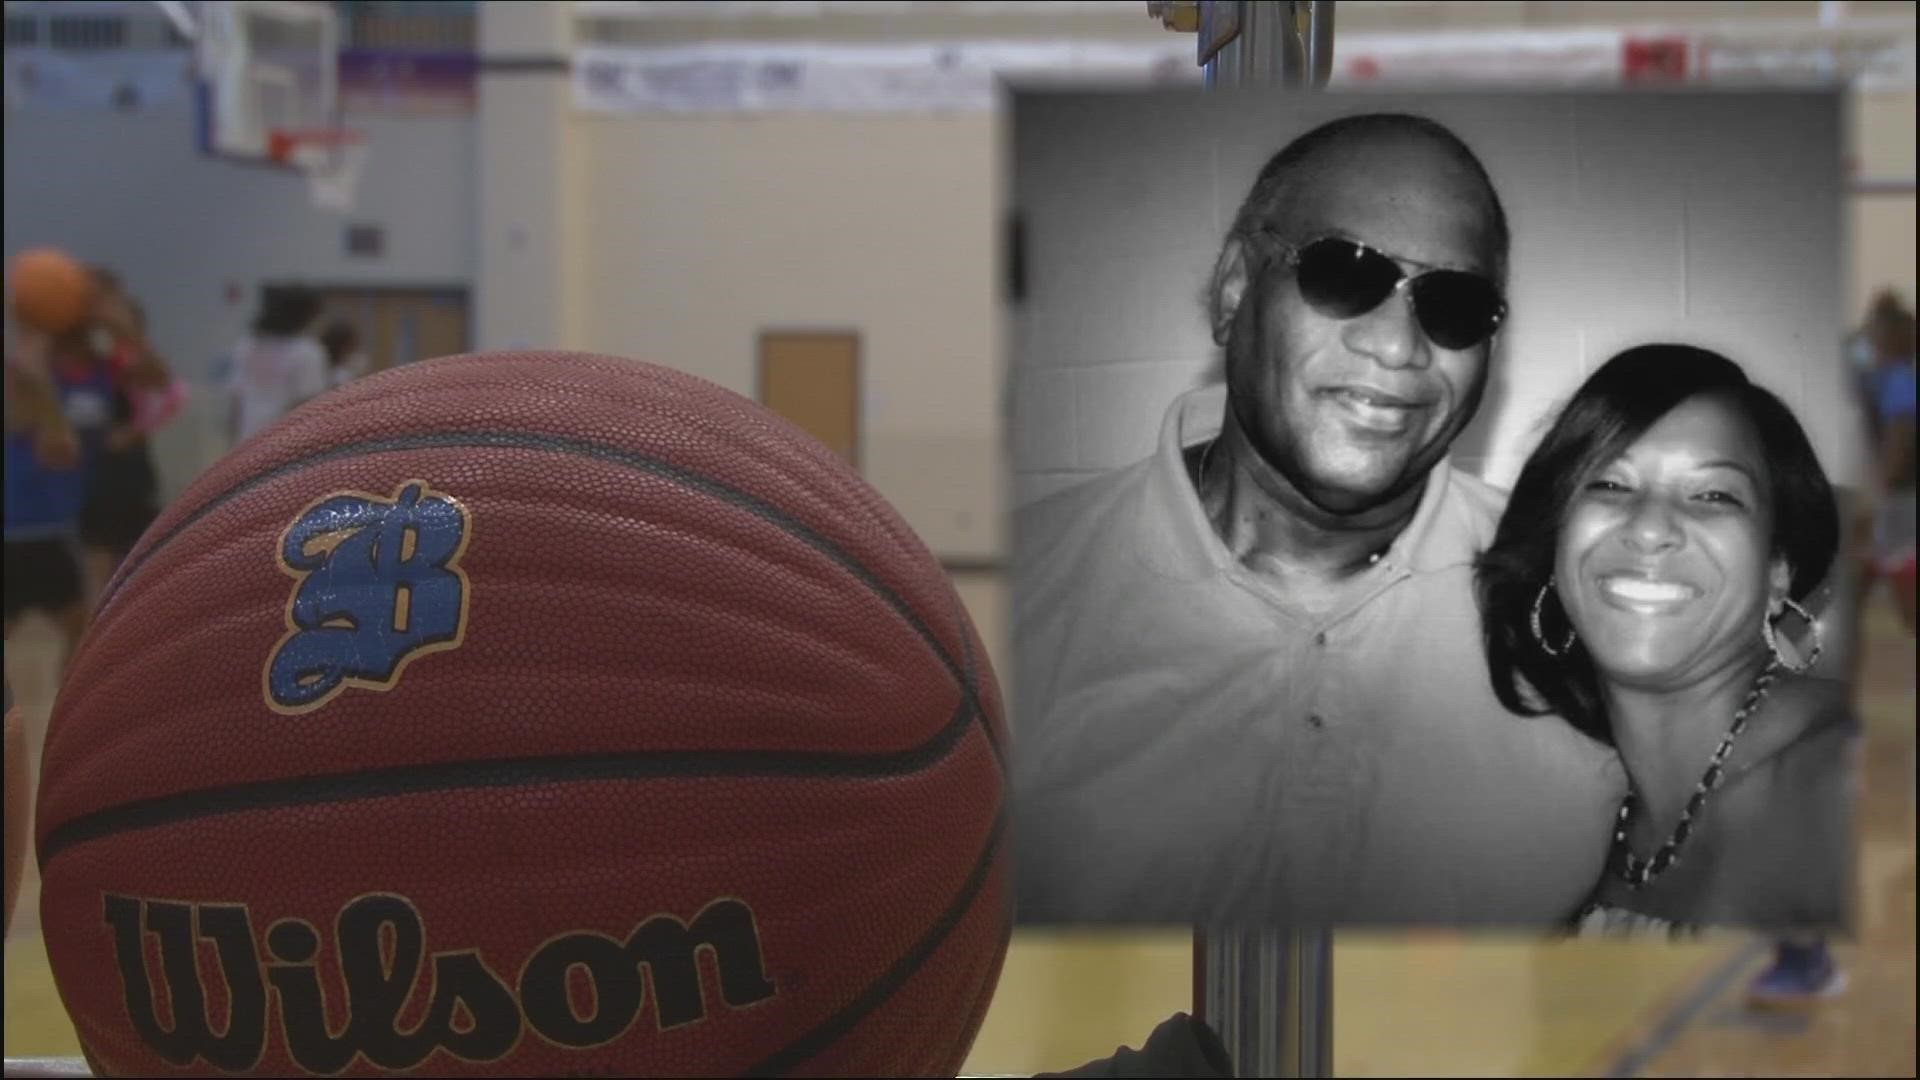 The Brunswick Lady Pirates basketball team wants to win a state title for their coach's father, who's been recovering from an illness.